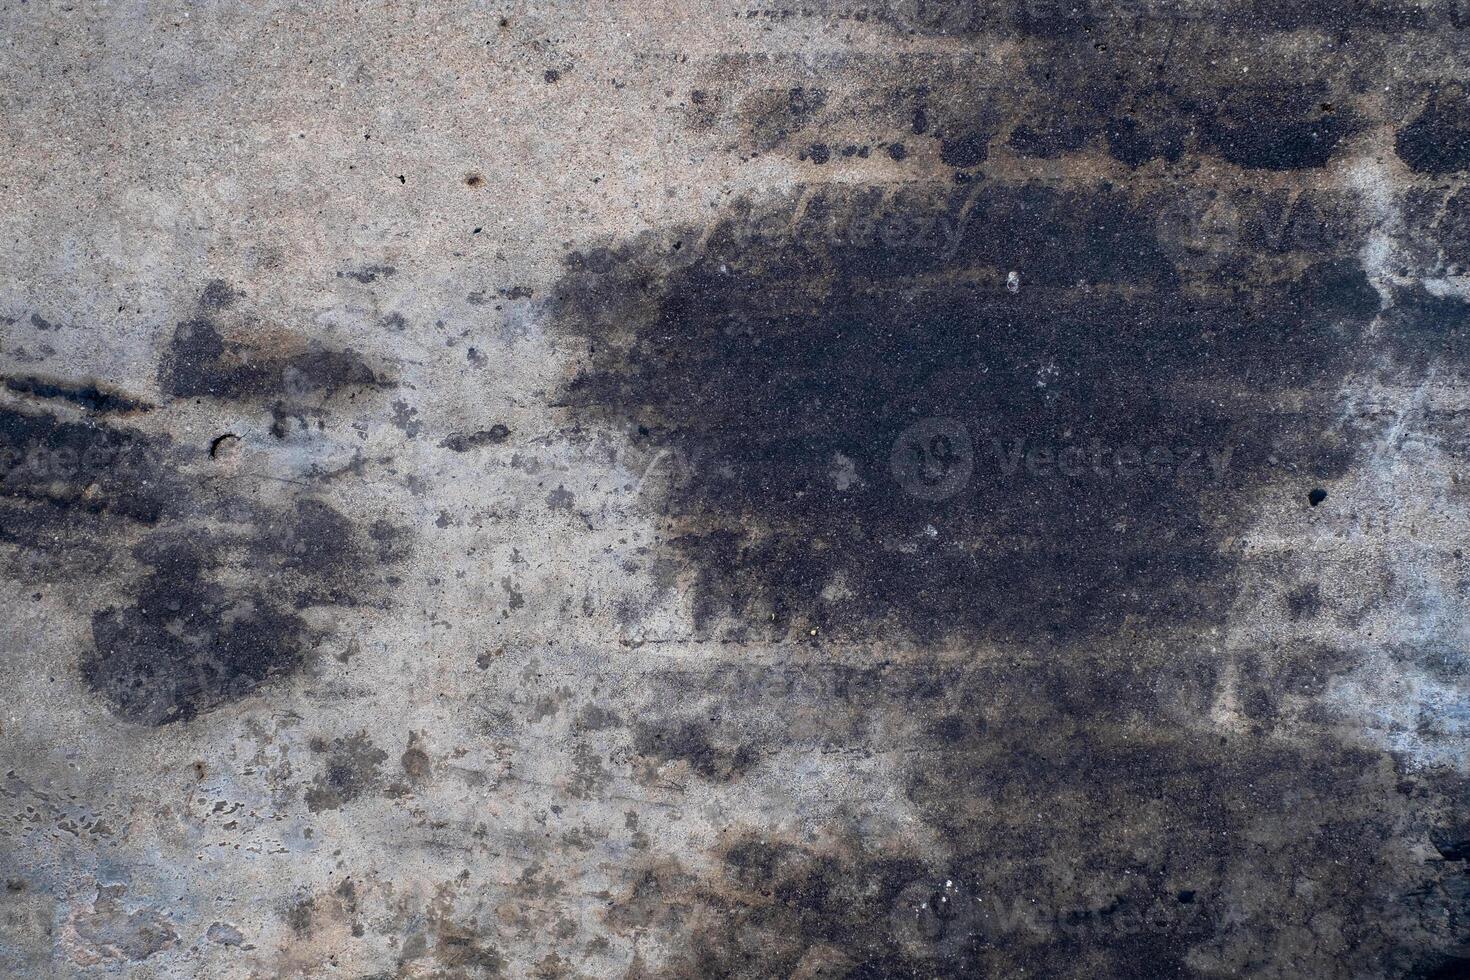 Car oil stains dripping onto cement floor, car engine oil, cement floor, dirt, old, top view, photo